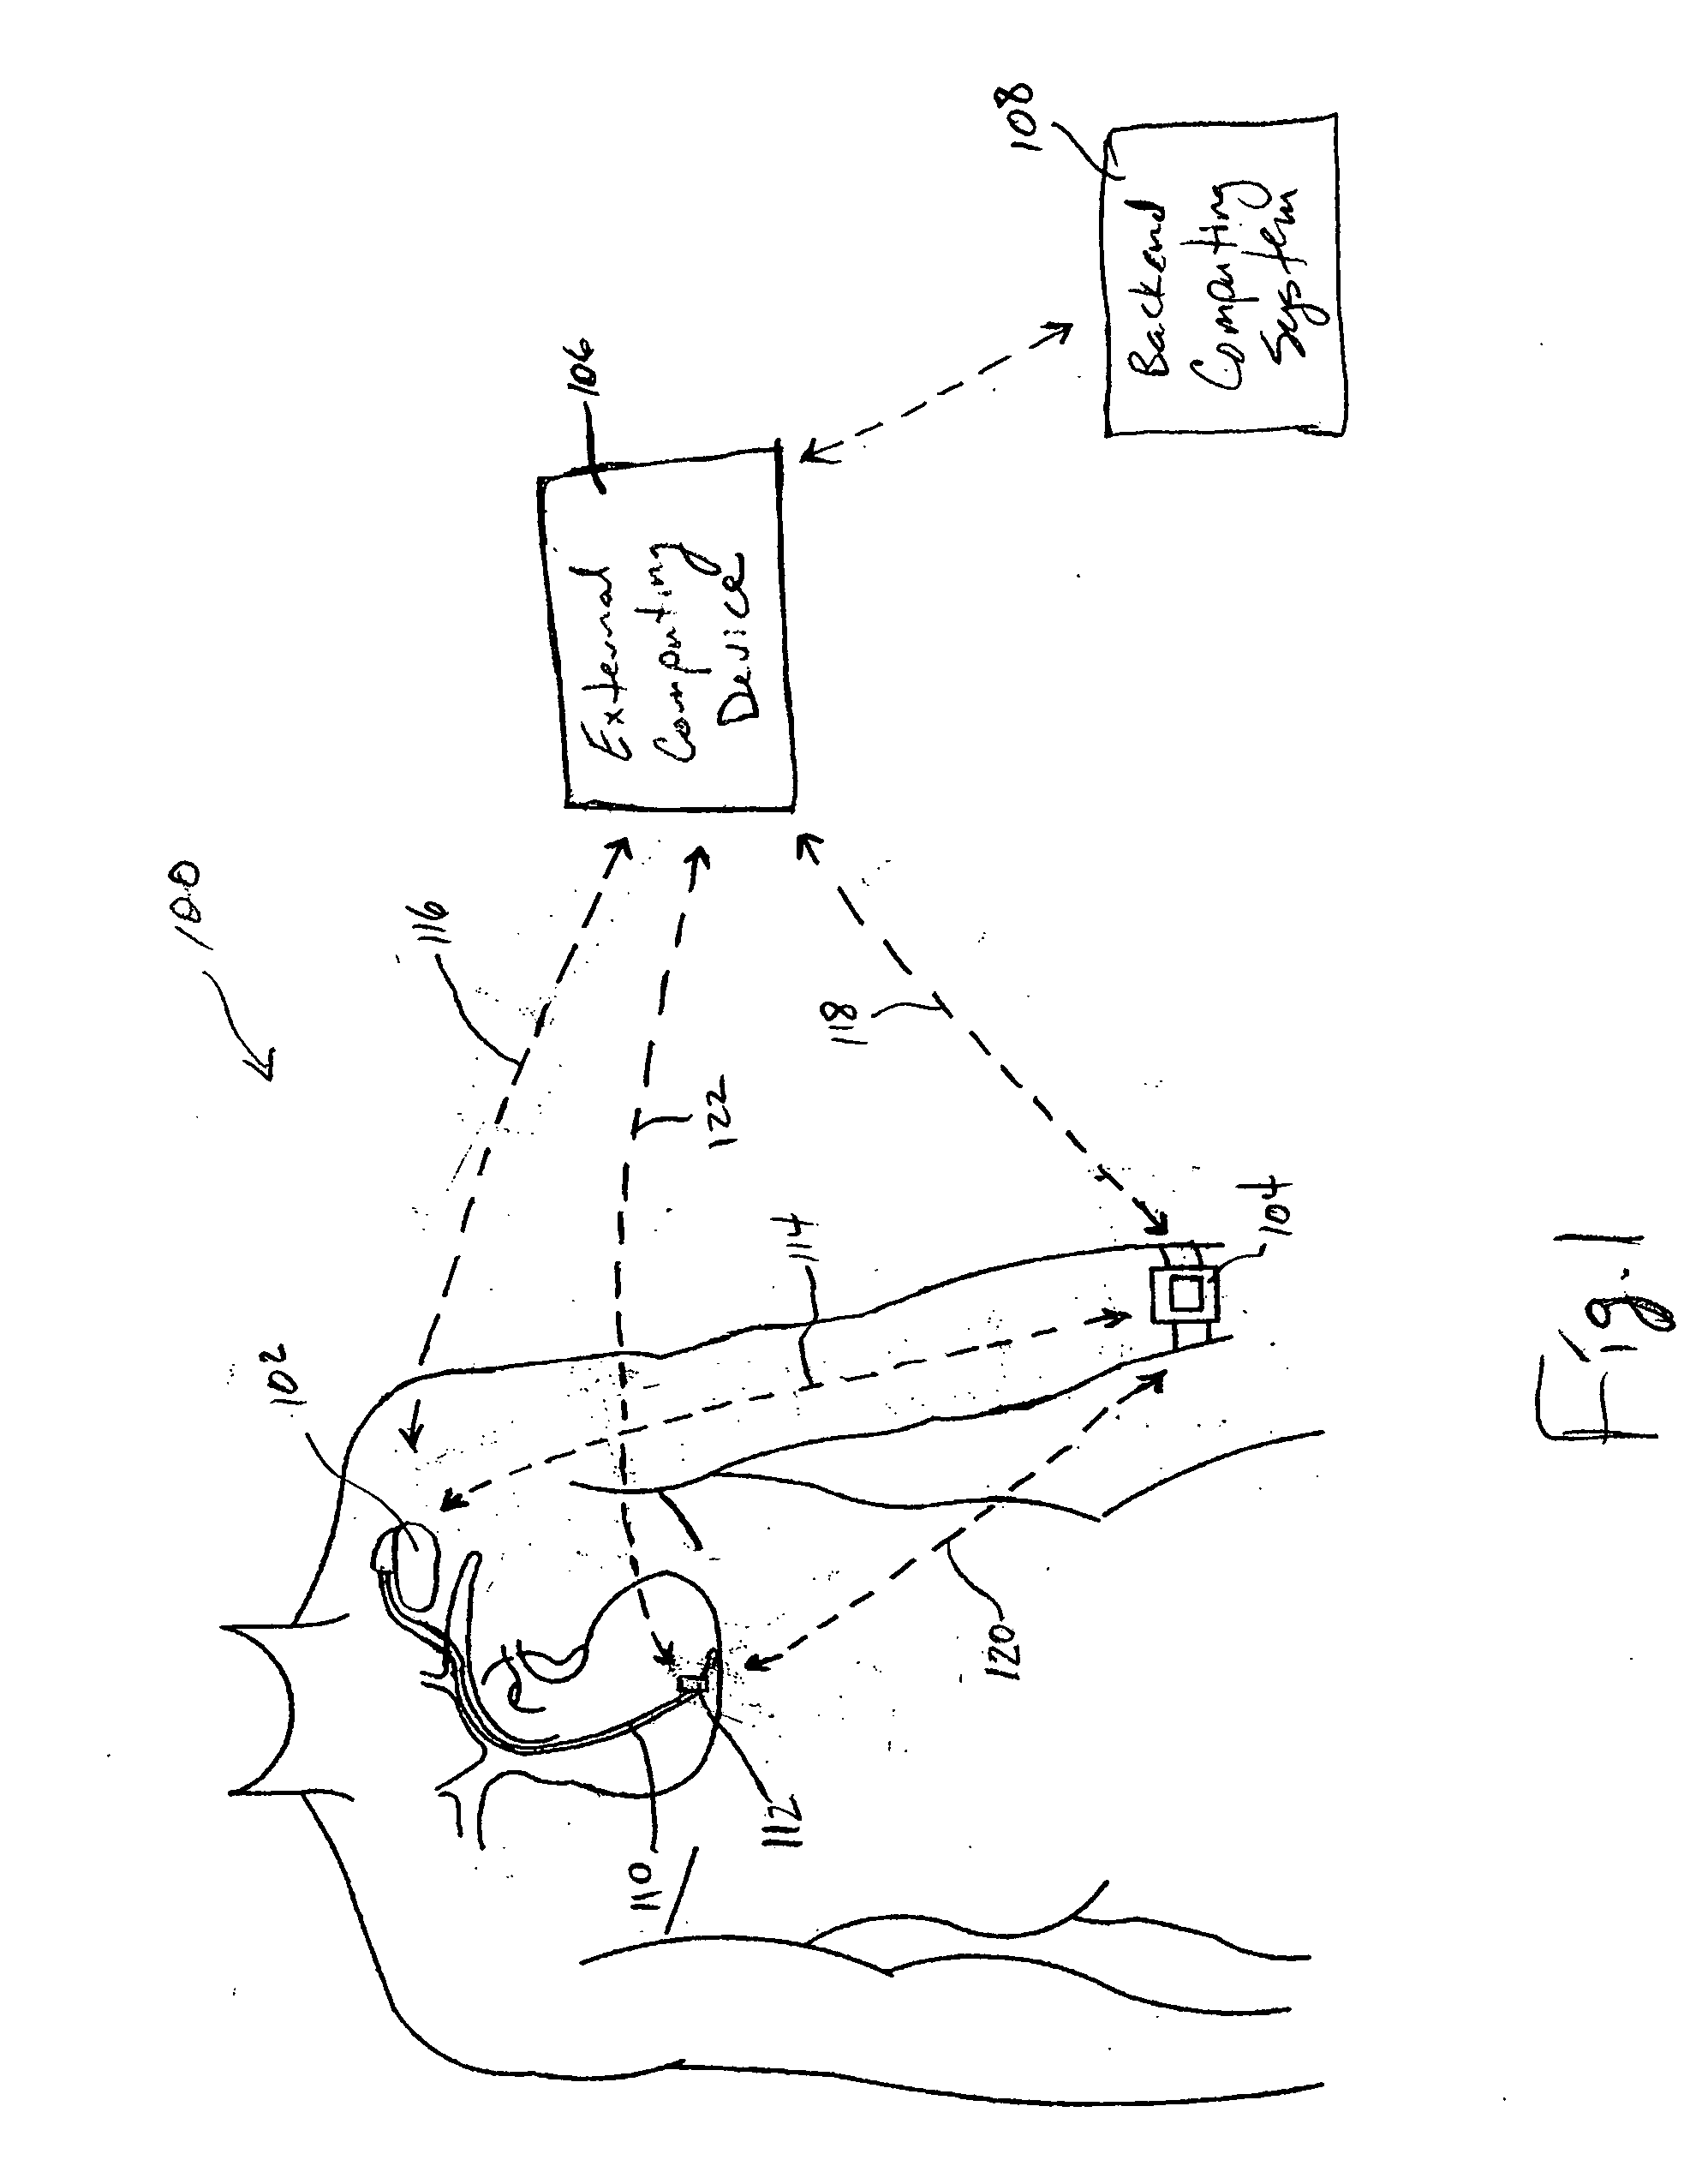 System and method for deriving relative physiologic measurements using an external computing device